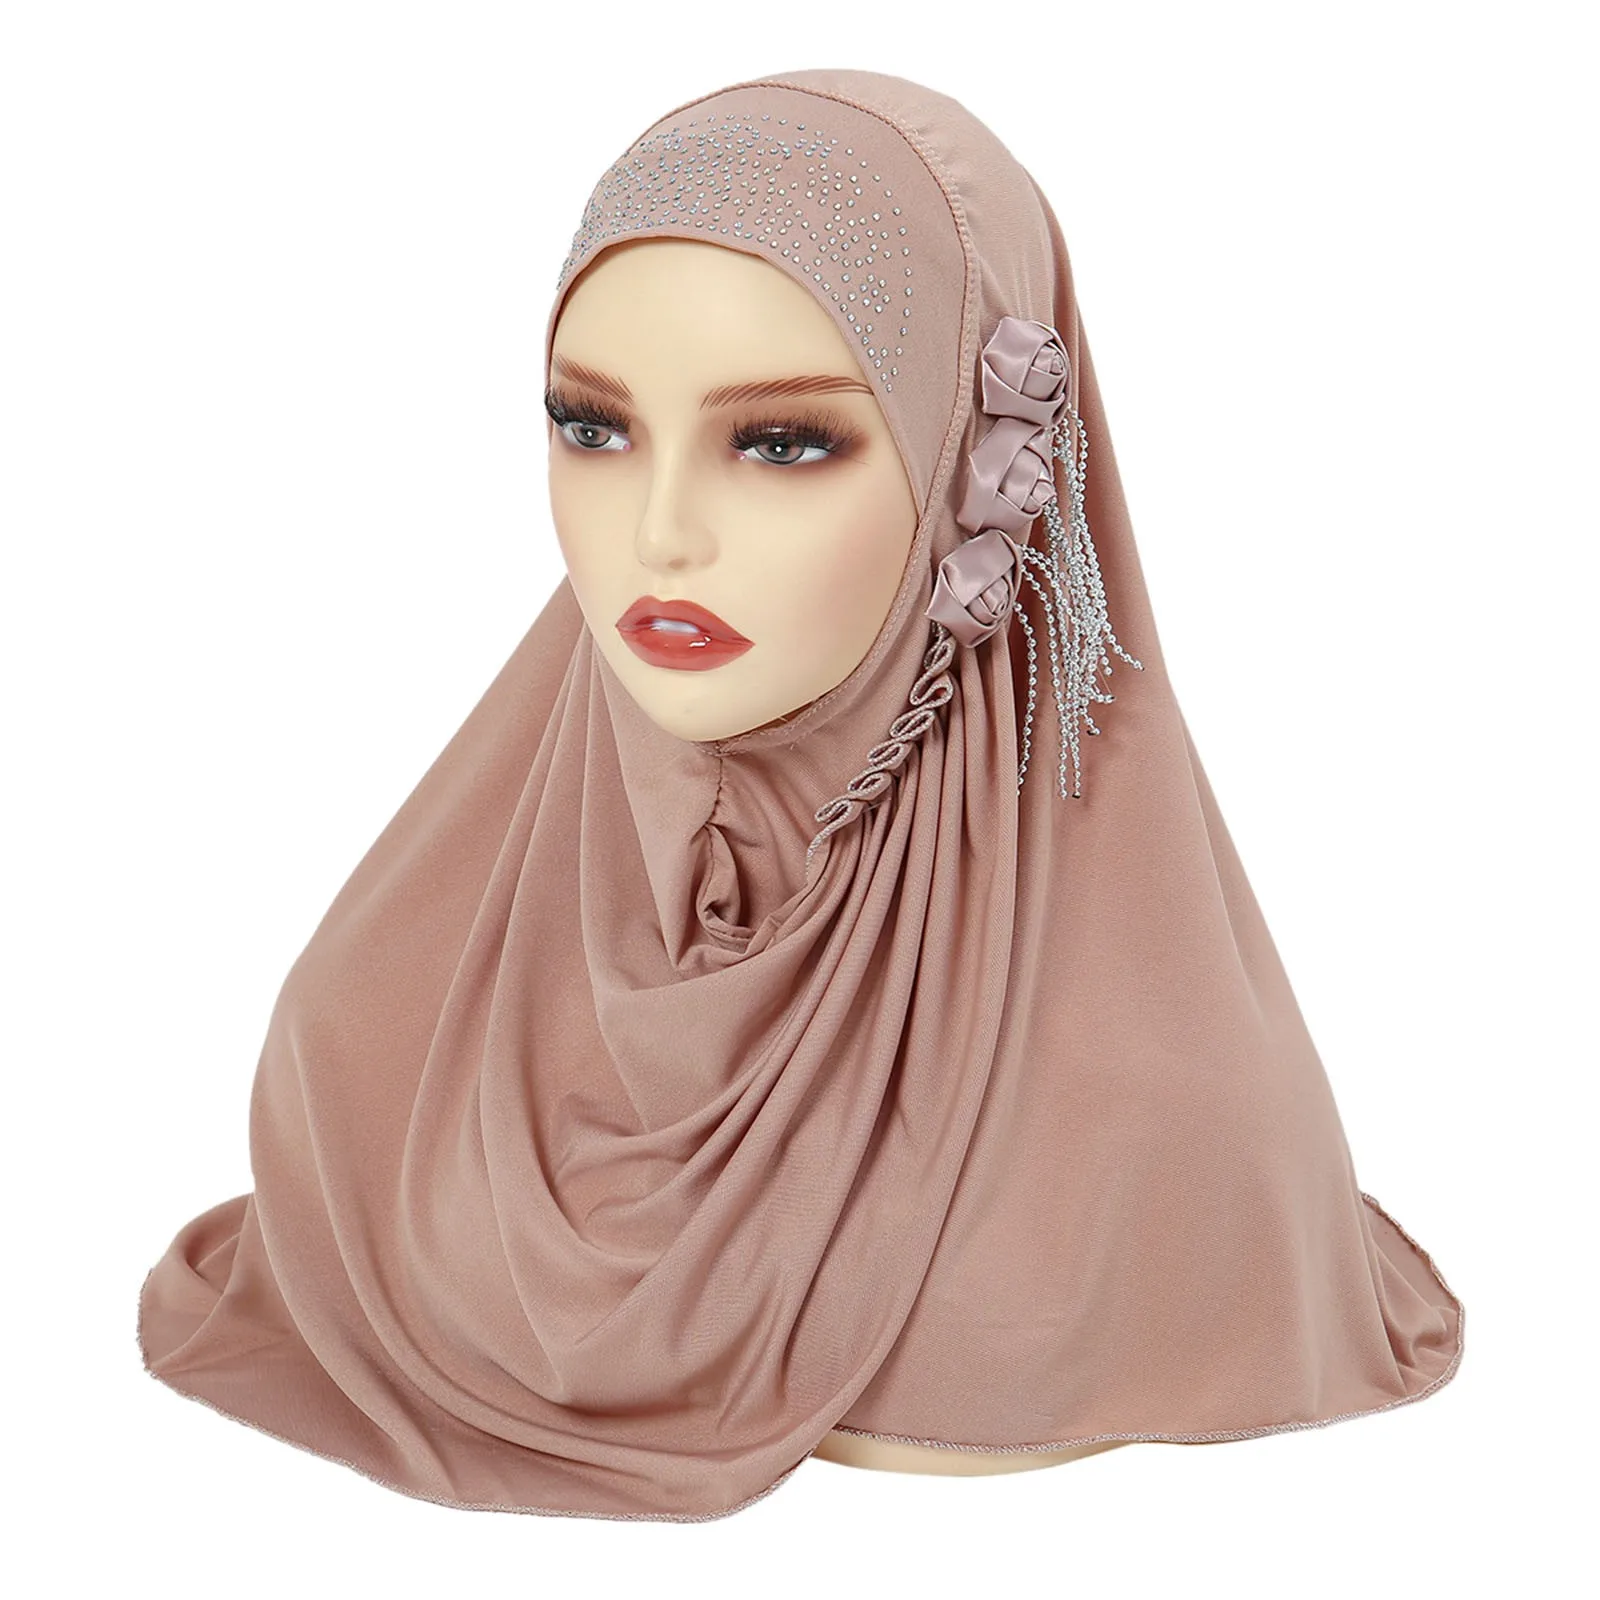 

Instant Hijabs Chiffon Hijab Scarf With Cross Jersey Caps Bonnet Muslim Fashion Women Veil Scarf HIjab With Cap Attached Shawls